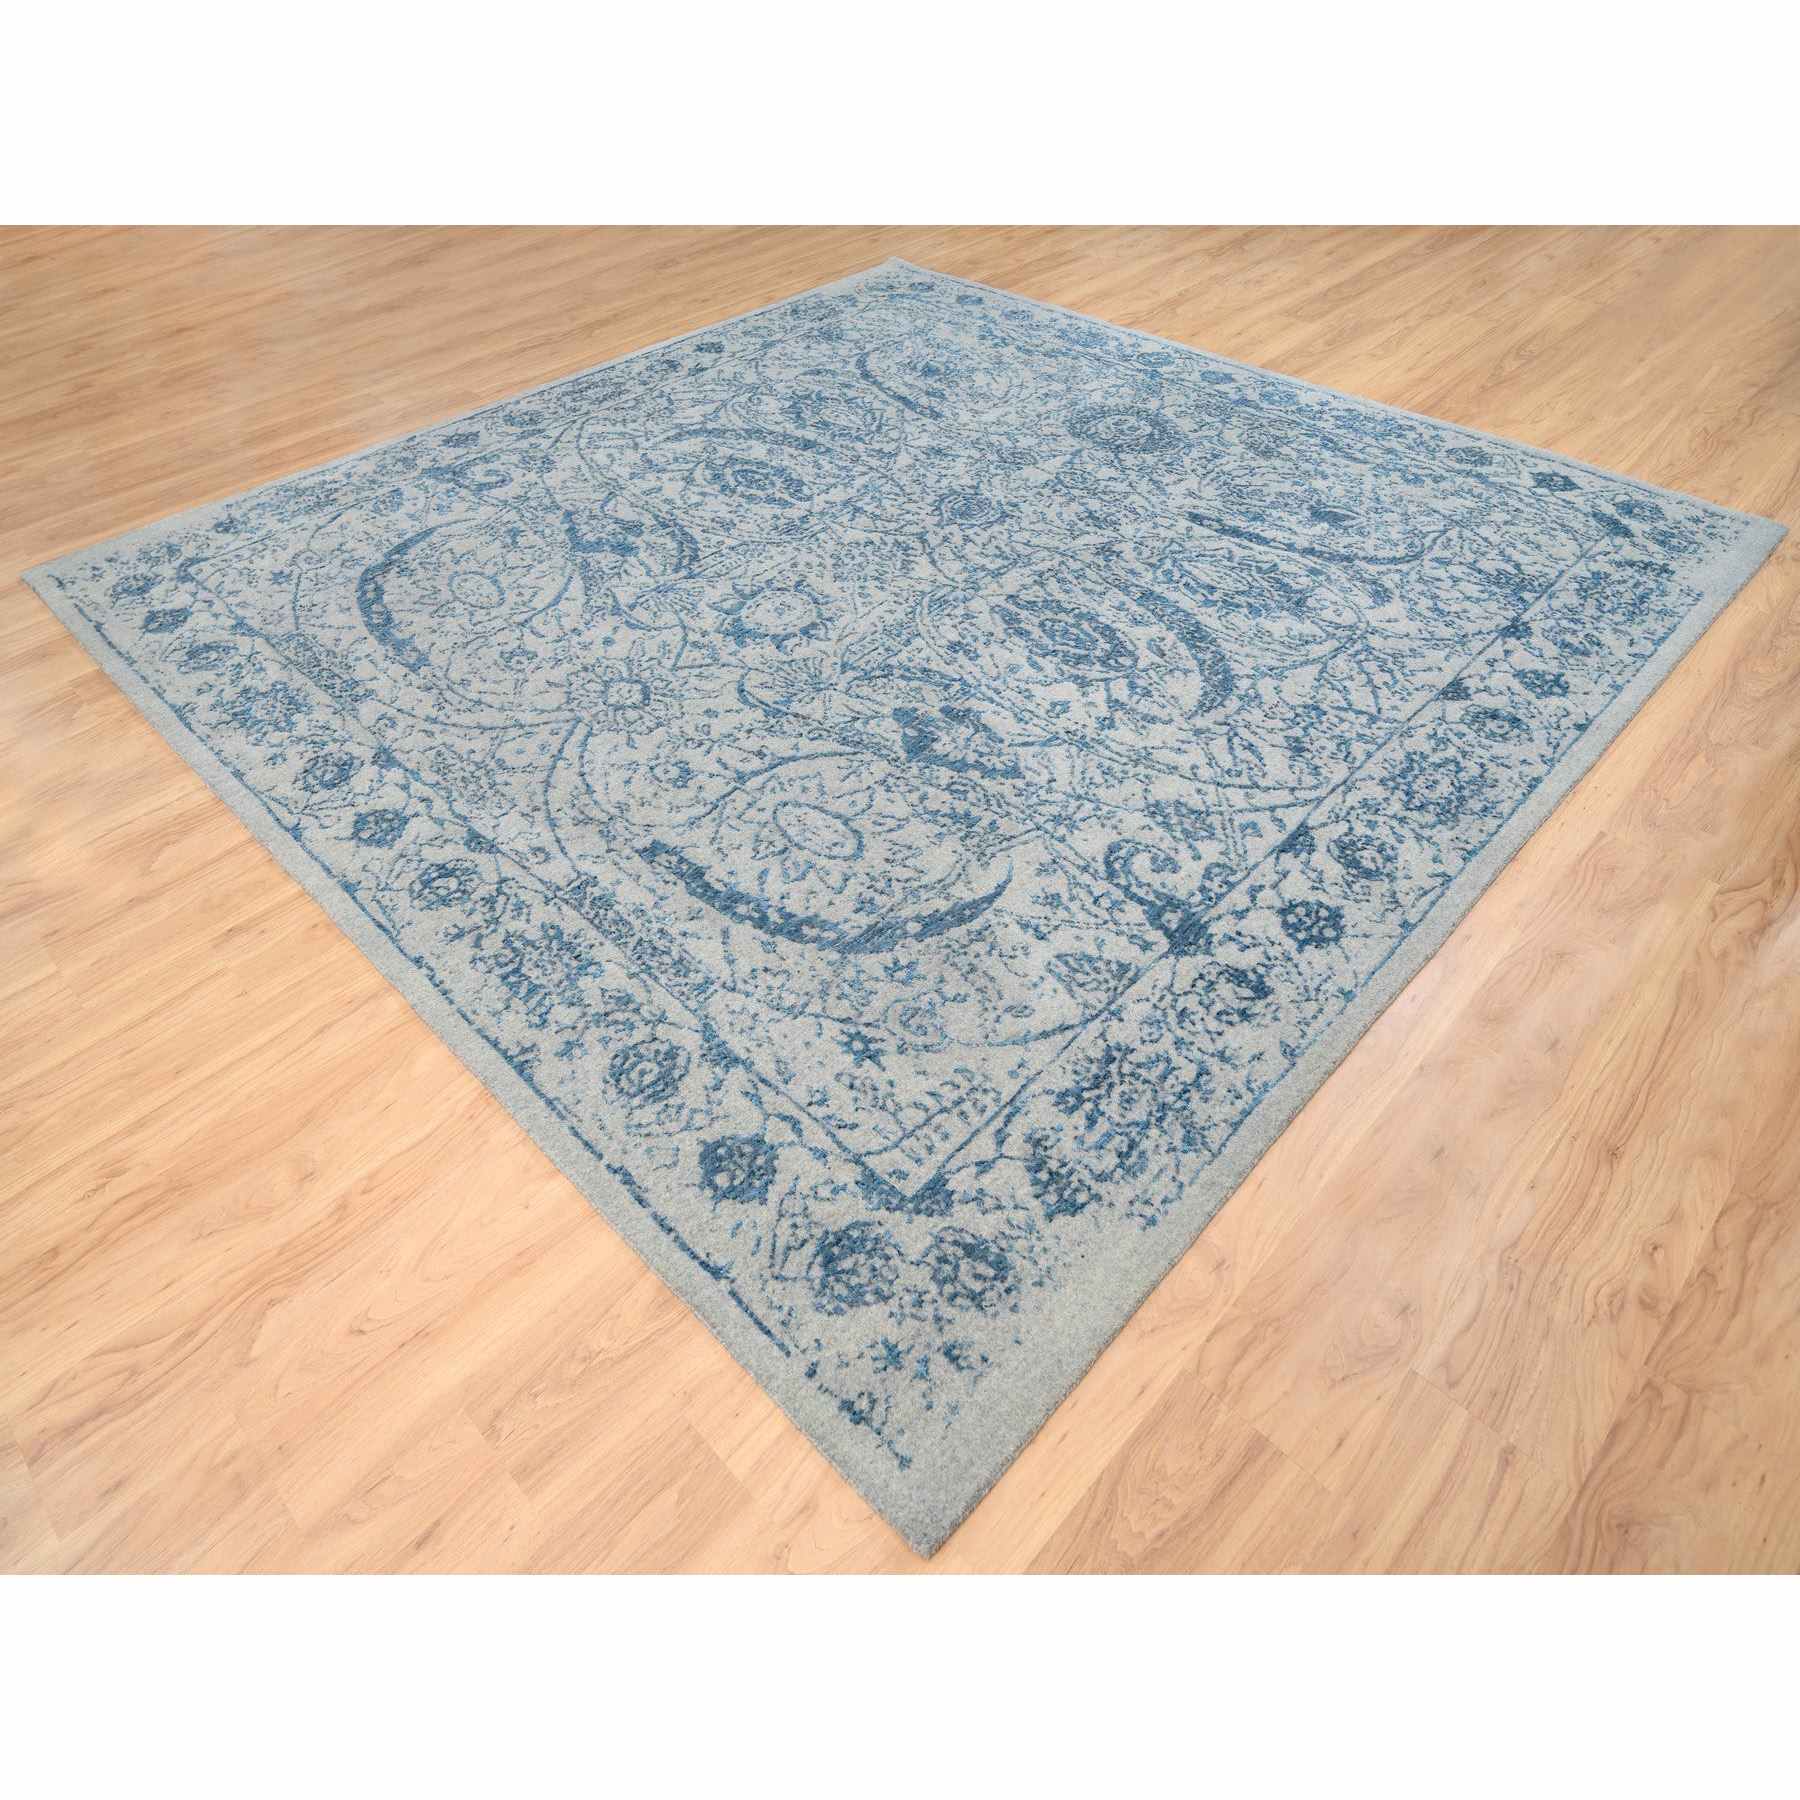 Transitional-Hand-Loomed-Rug-317405